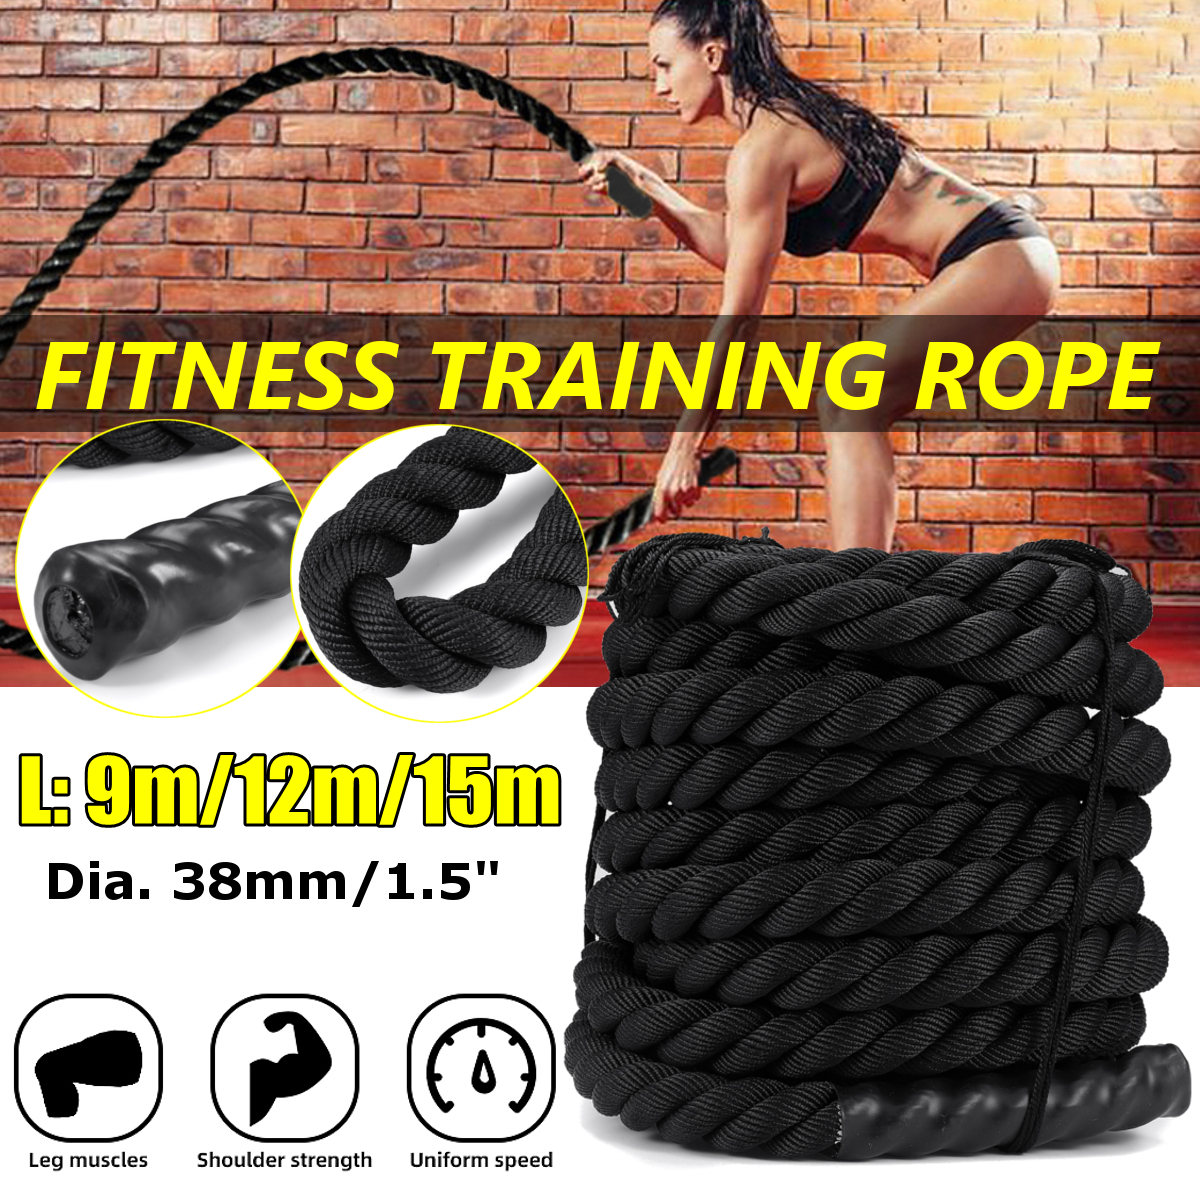 91215m-Battle-Rope-Strength-Training-Undulation-Rope-Exercise-Tools-Home-Gym-Fitness-Equipment-1858044-1